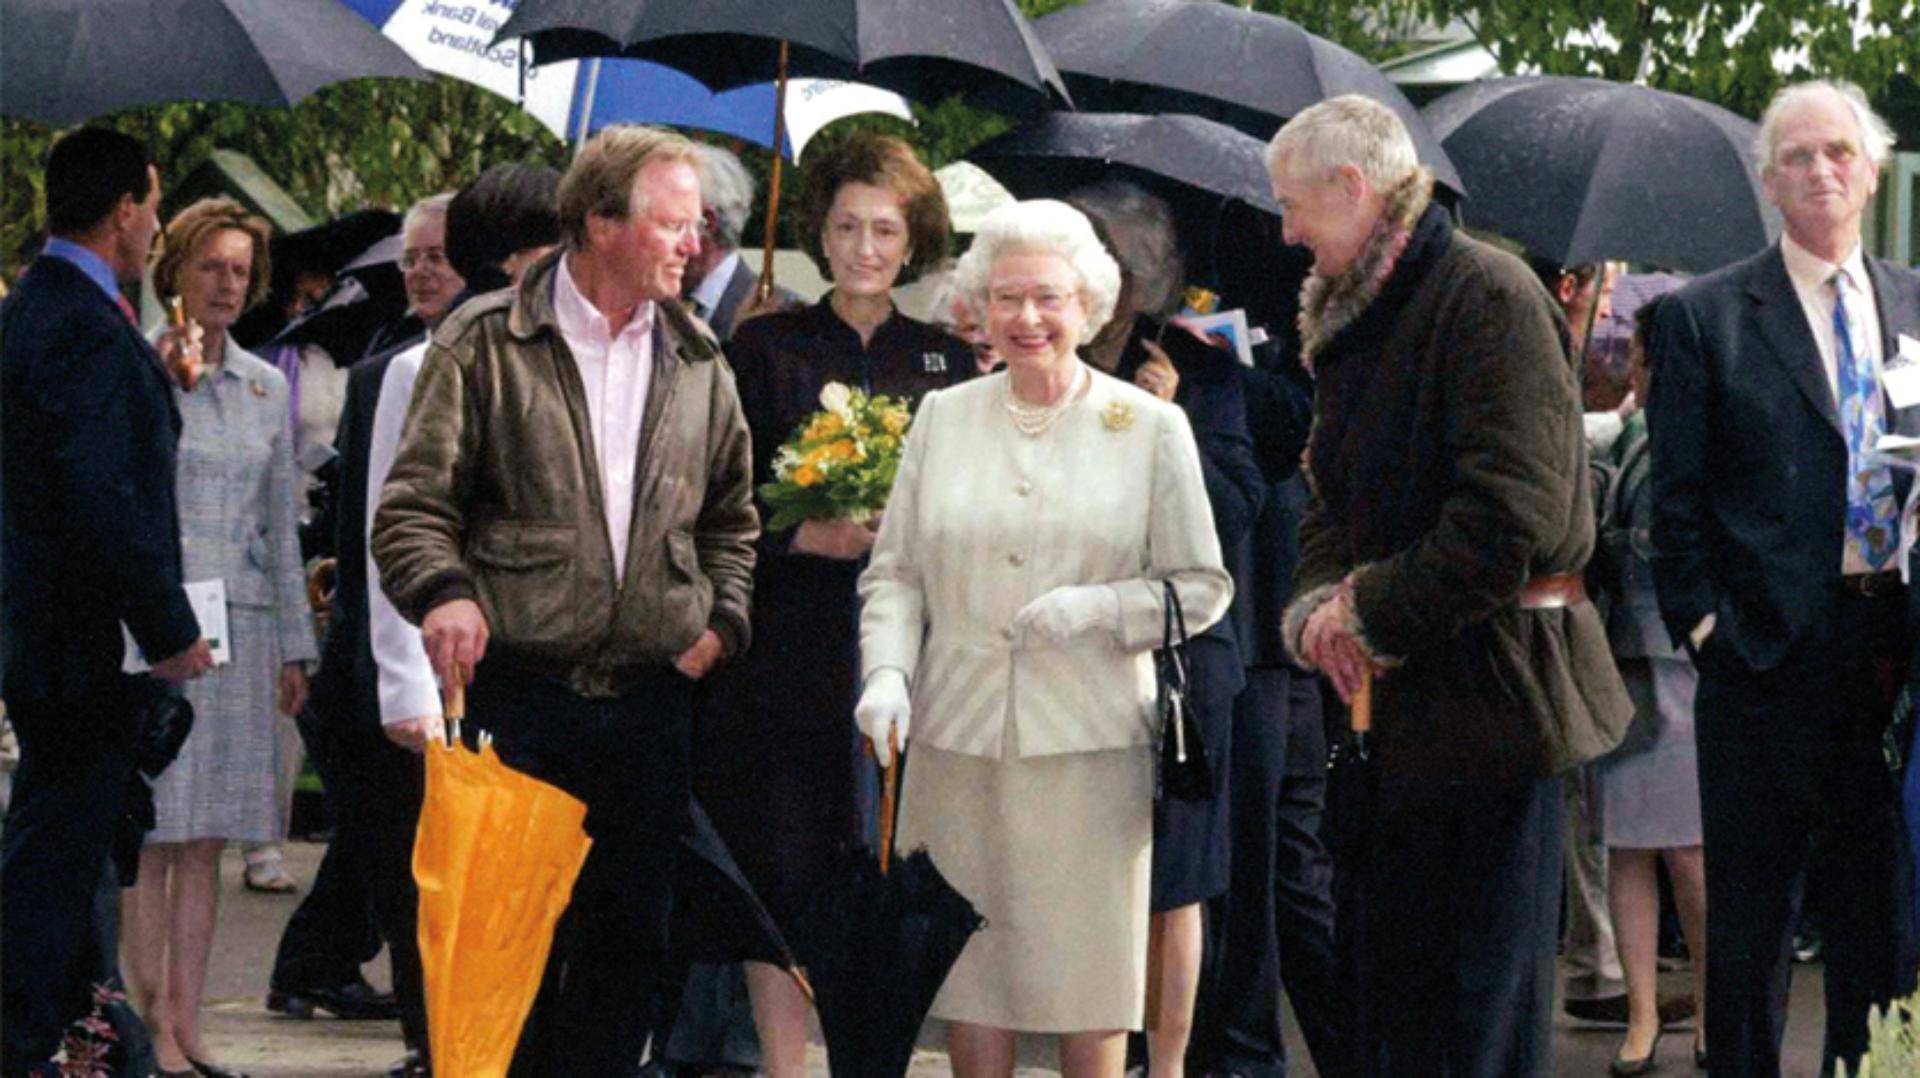 Queen Elizabeth II at The Chelsea Flower Show with James Dyson and Charles Moore